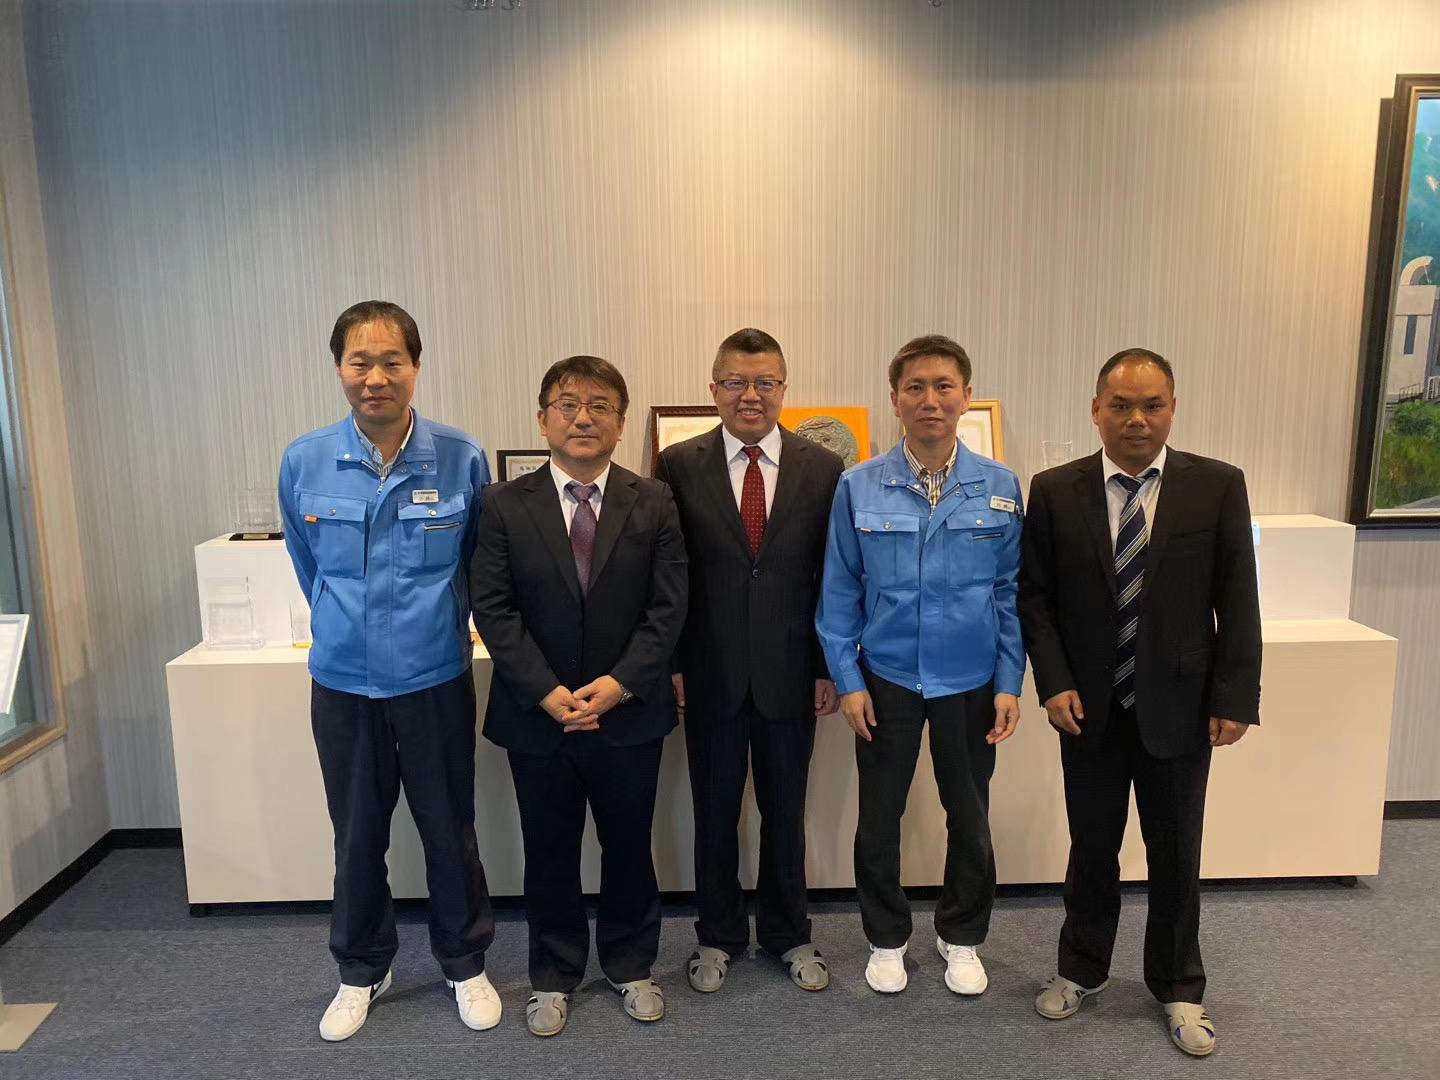 In October 2019, we visited a potential customer in Japan.